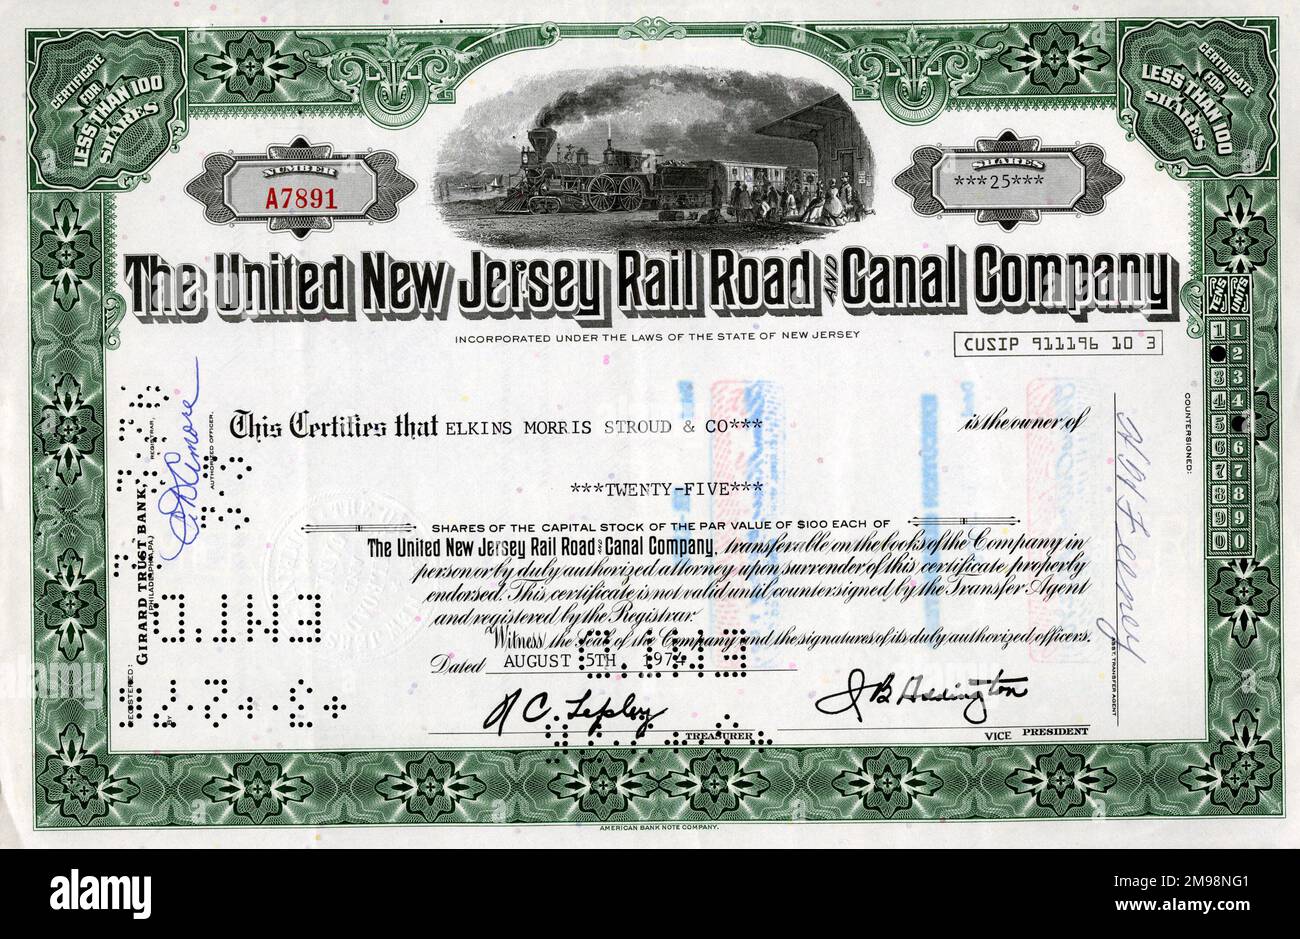 Stock Share Certificate - The United New Jersey Rail Road and Canal Company, 25 shares. Stock Photo